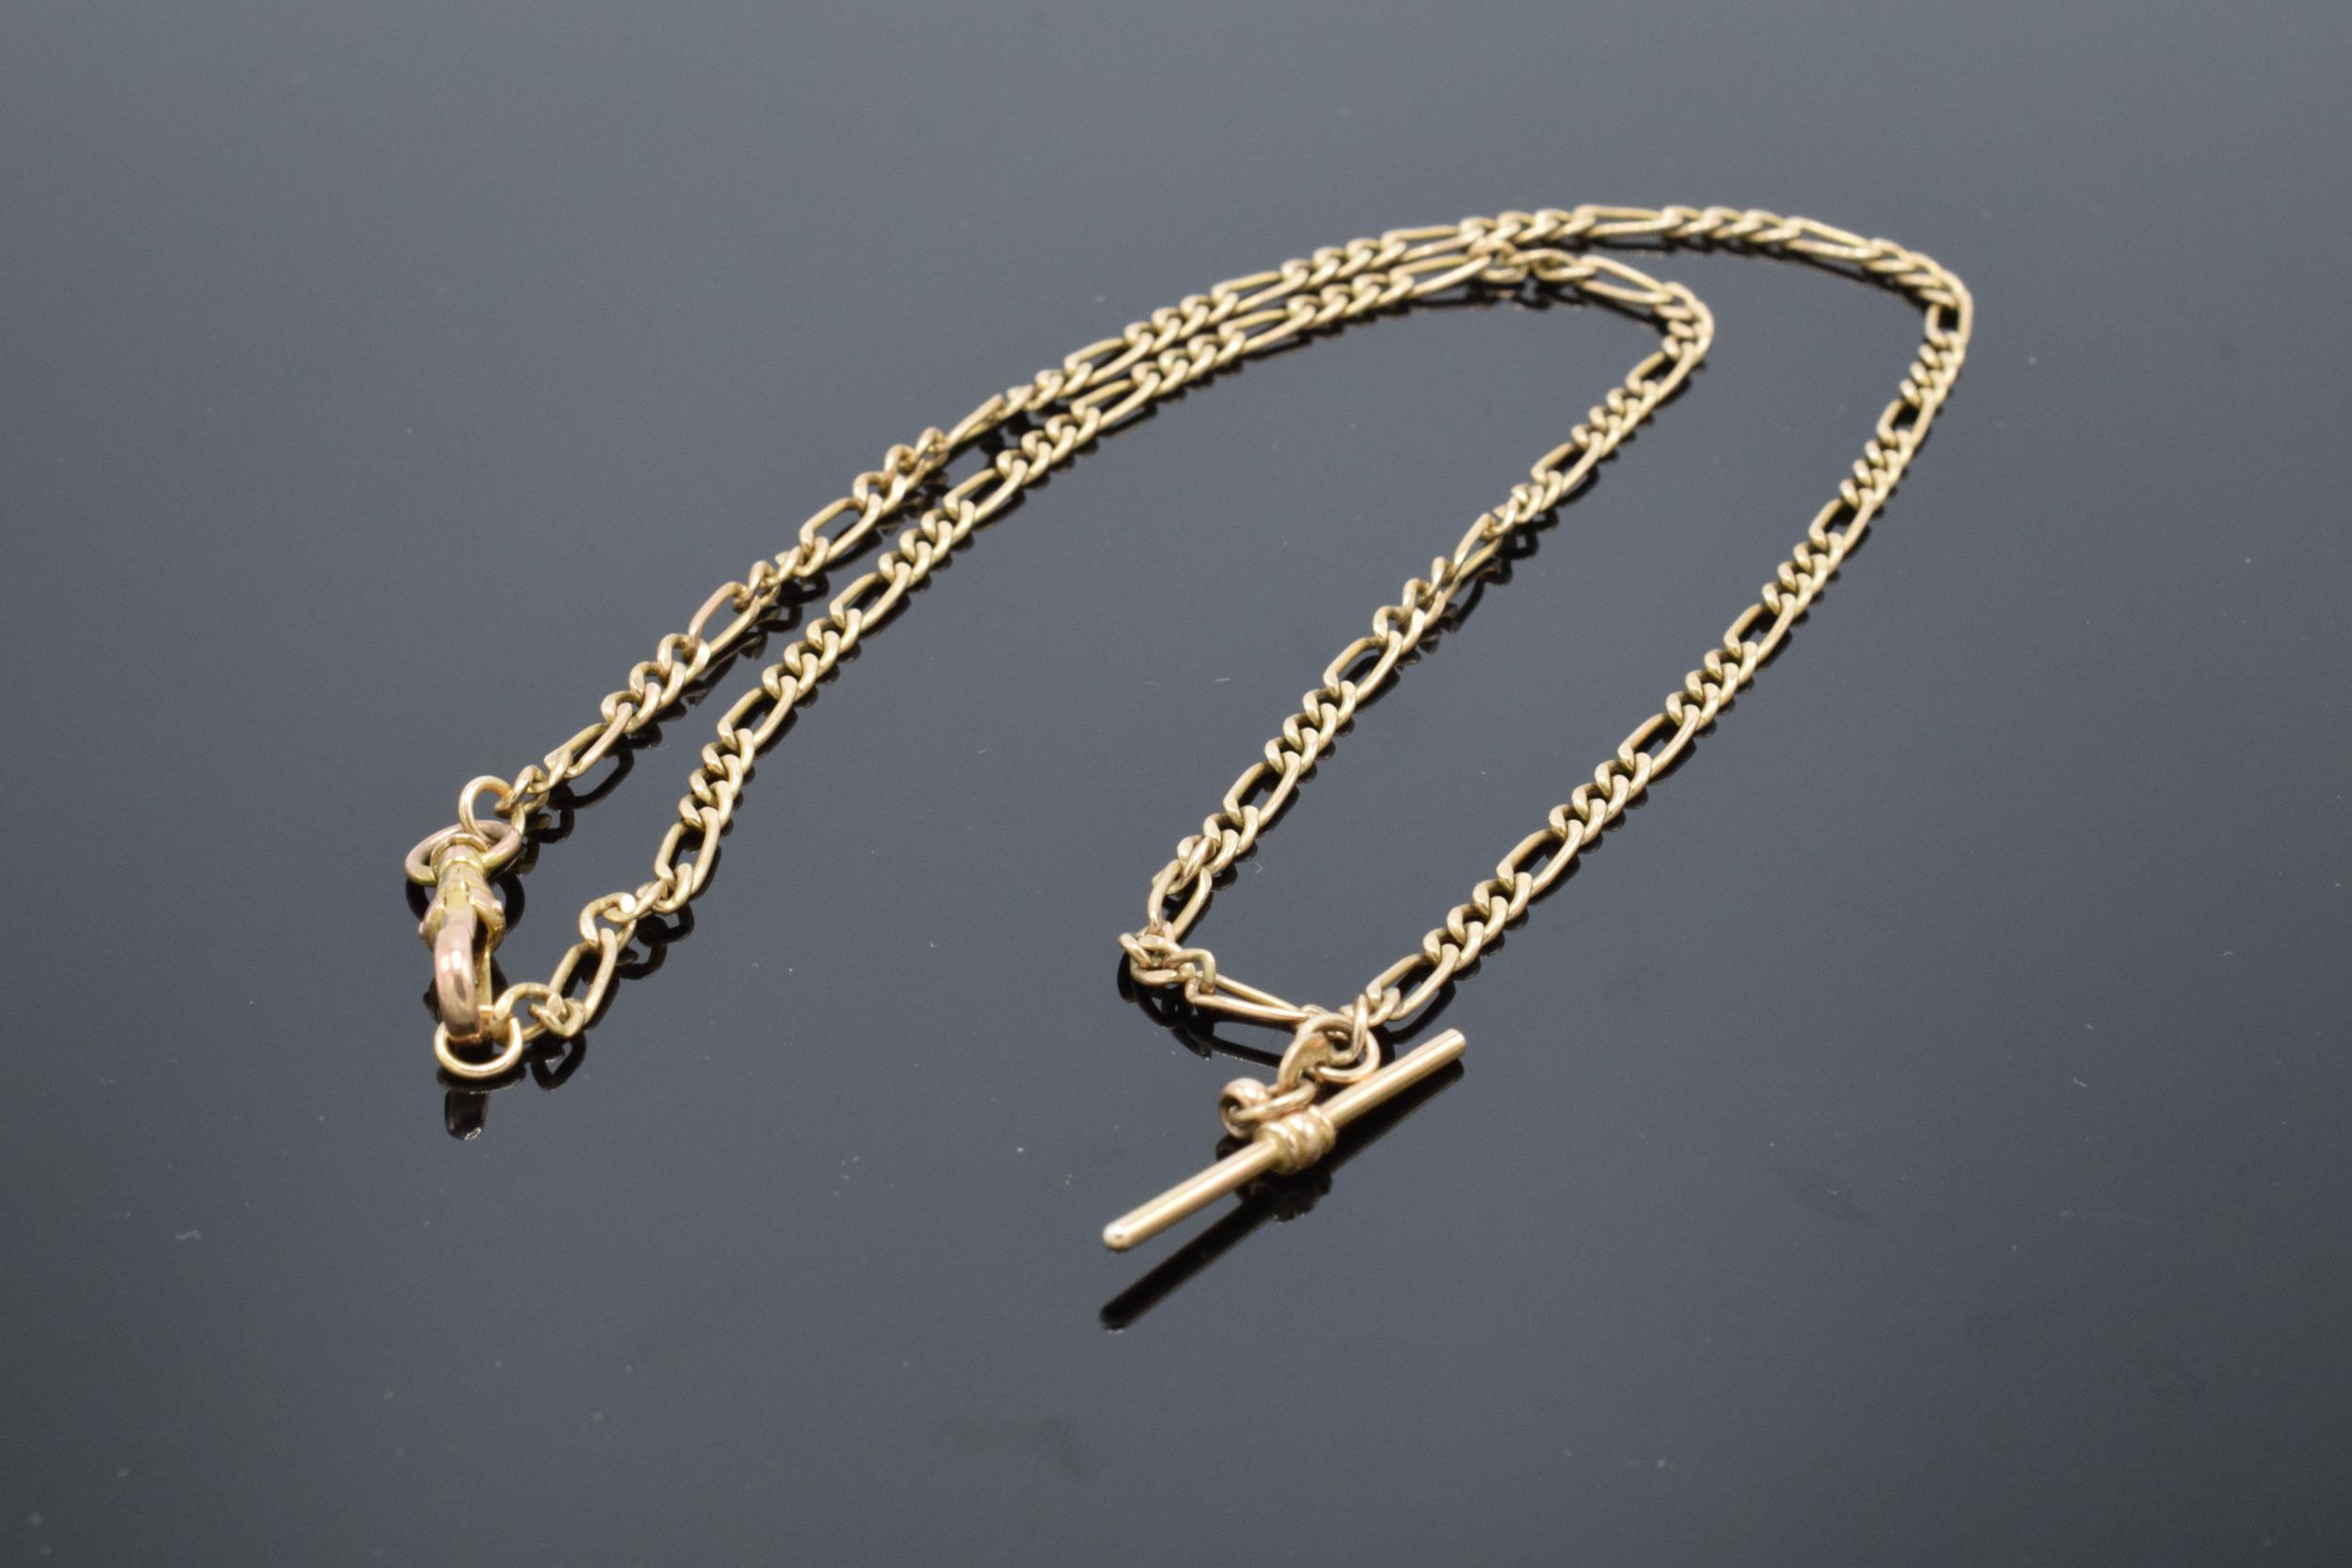 9ct gold watch chain style necklace 5.1g - Image 5 of 5